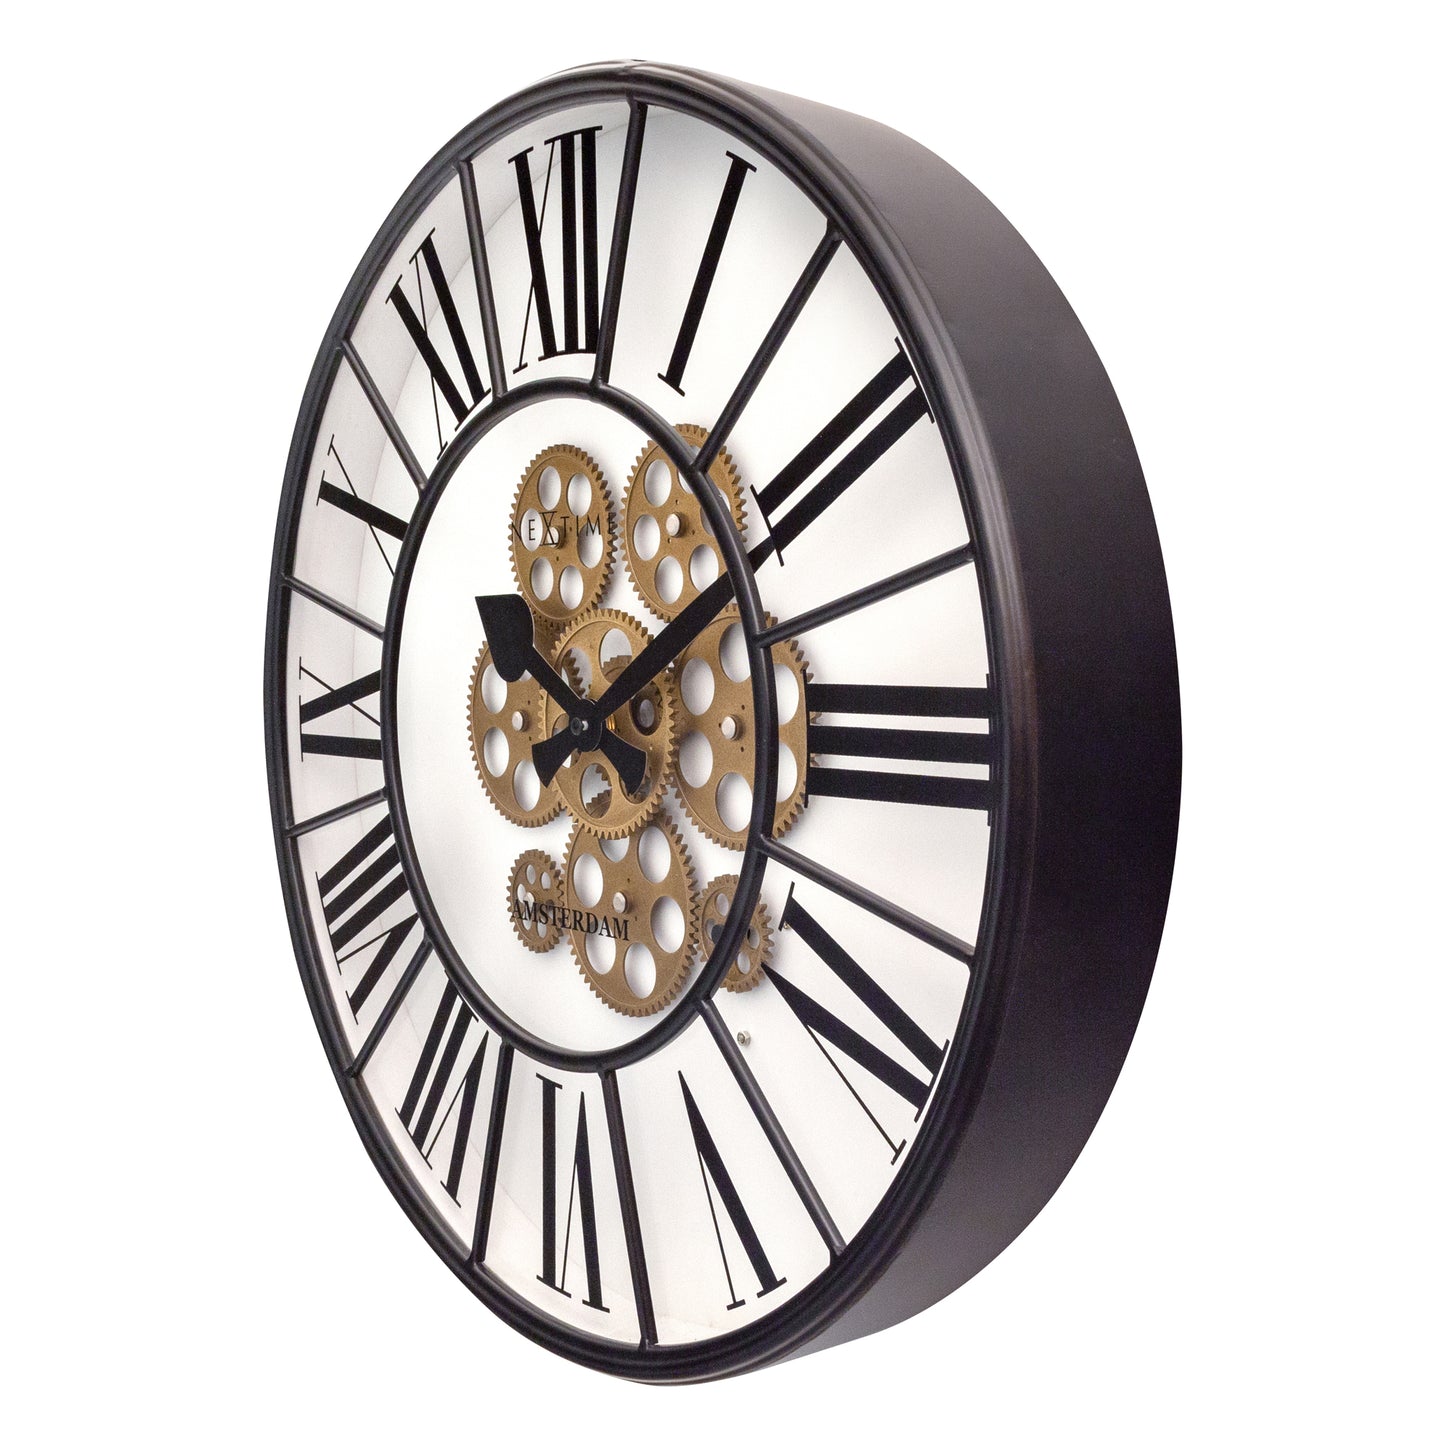 White Gear Clock - Large Wall Clock - 50cm - Moving Gears - "William" - NeXtime